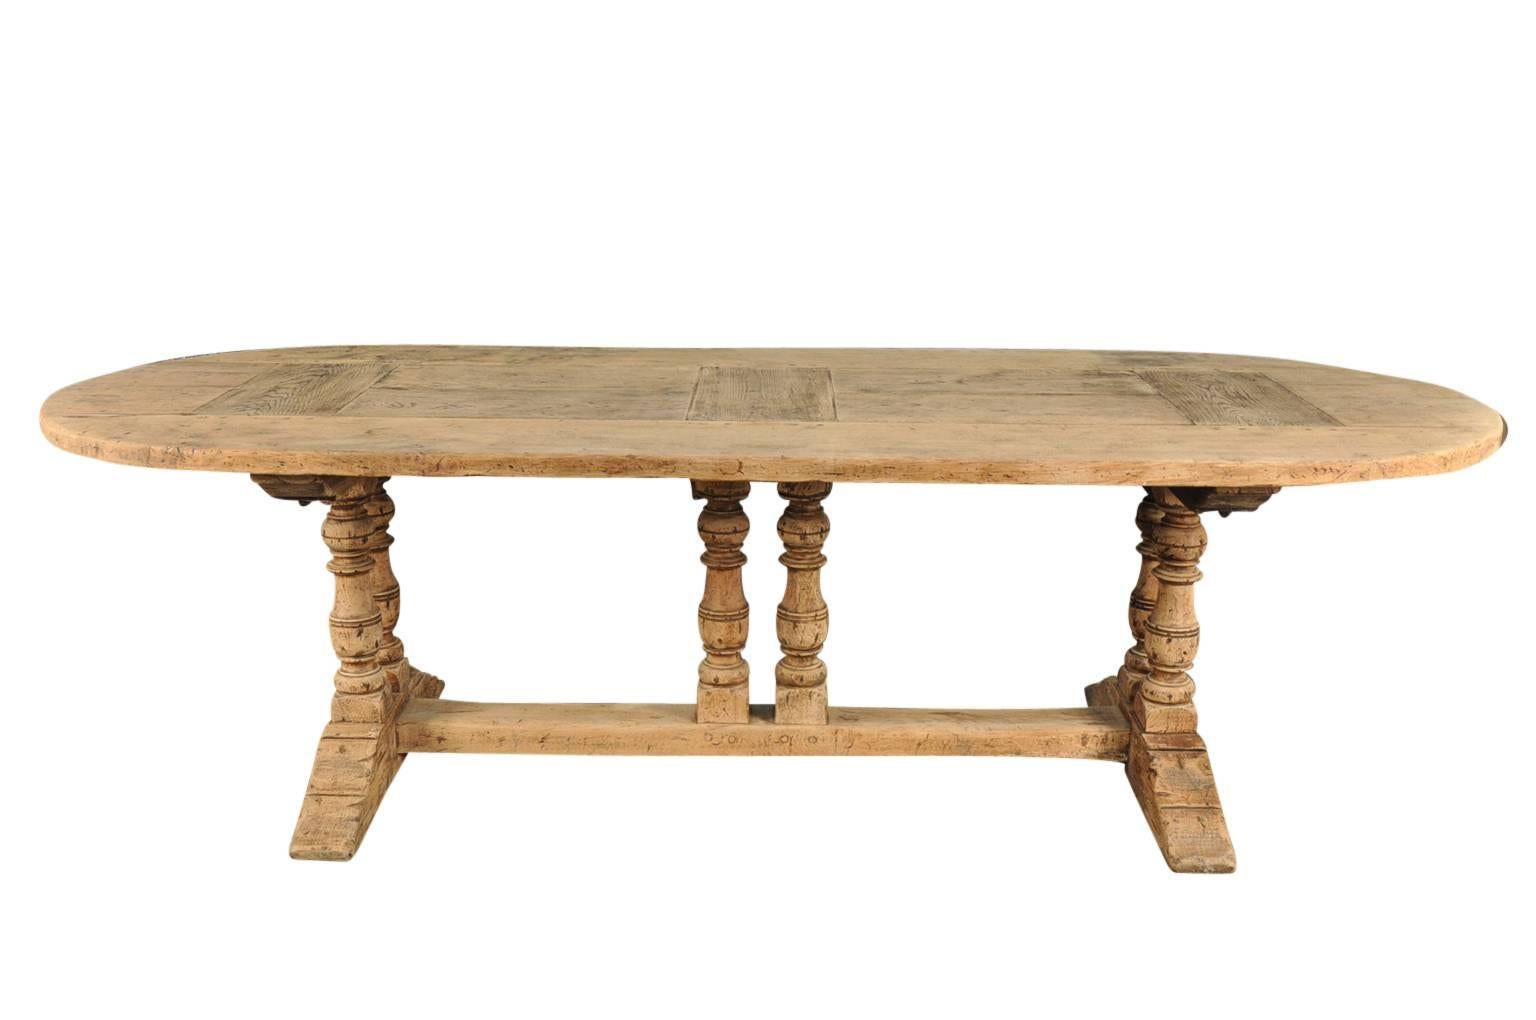 A very charming oval shaped French balustre leg farm table trestle table. Soundly constructed from washed bleached oak with lovely 